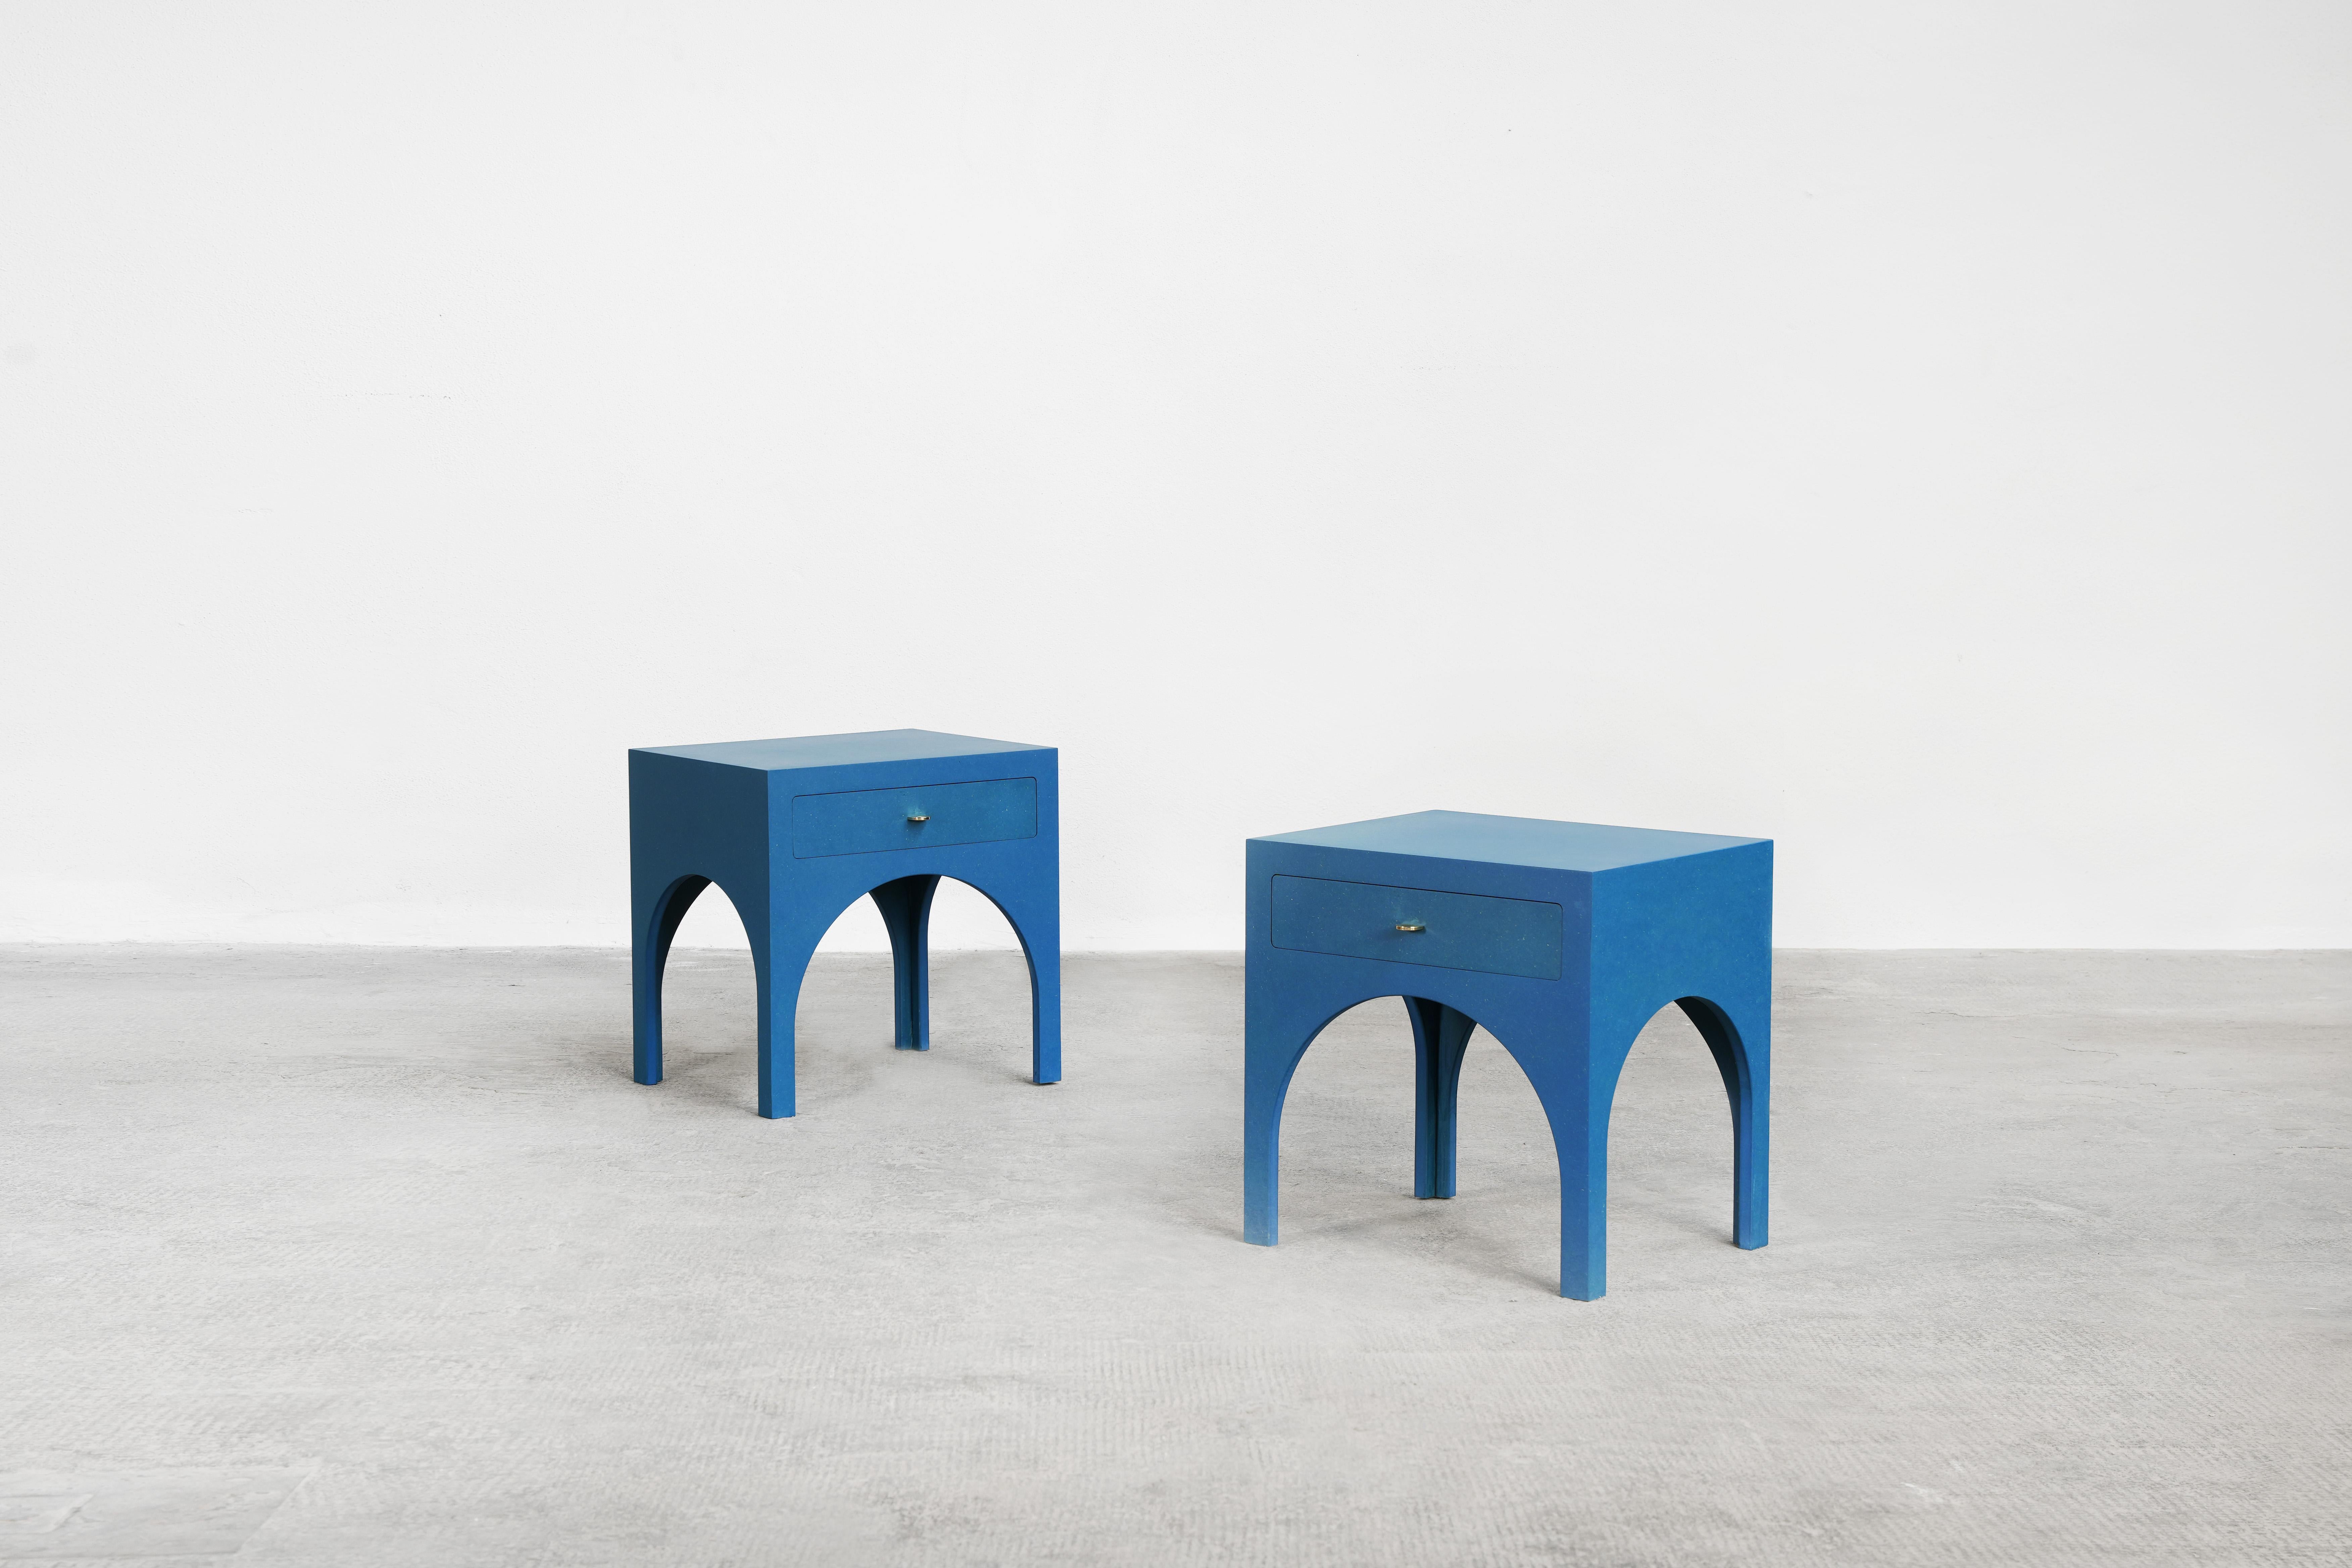 Beautiful nightstand designed by Yuzo Bachmann for Atelier Bachmann, handcrafted in Germany, 2019.
This nightstand is made out of blue valchromat and brass handles. Finished with natural furniture wax.

Available made to order within 3-4 weeks.